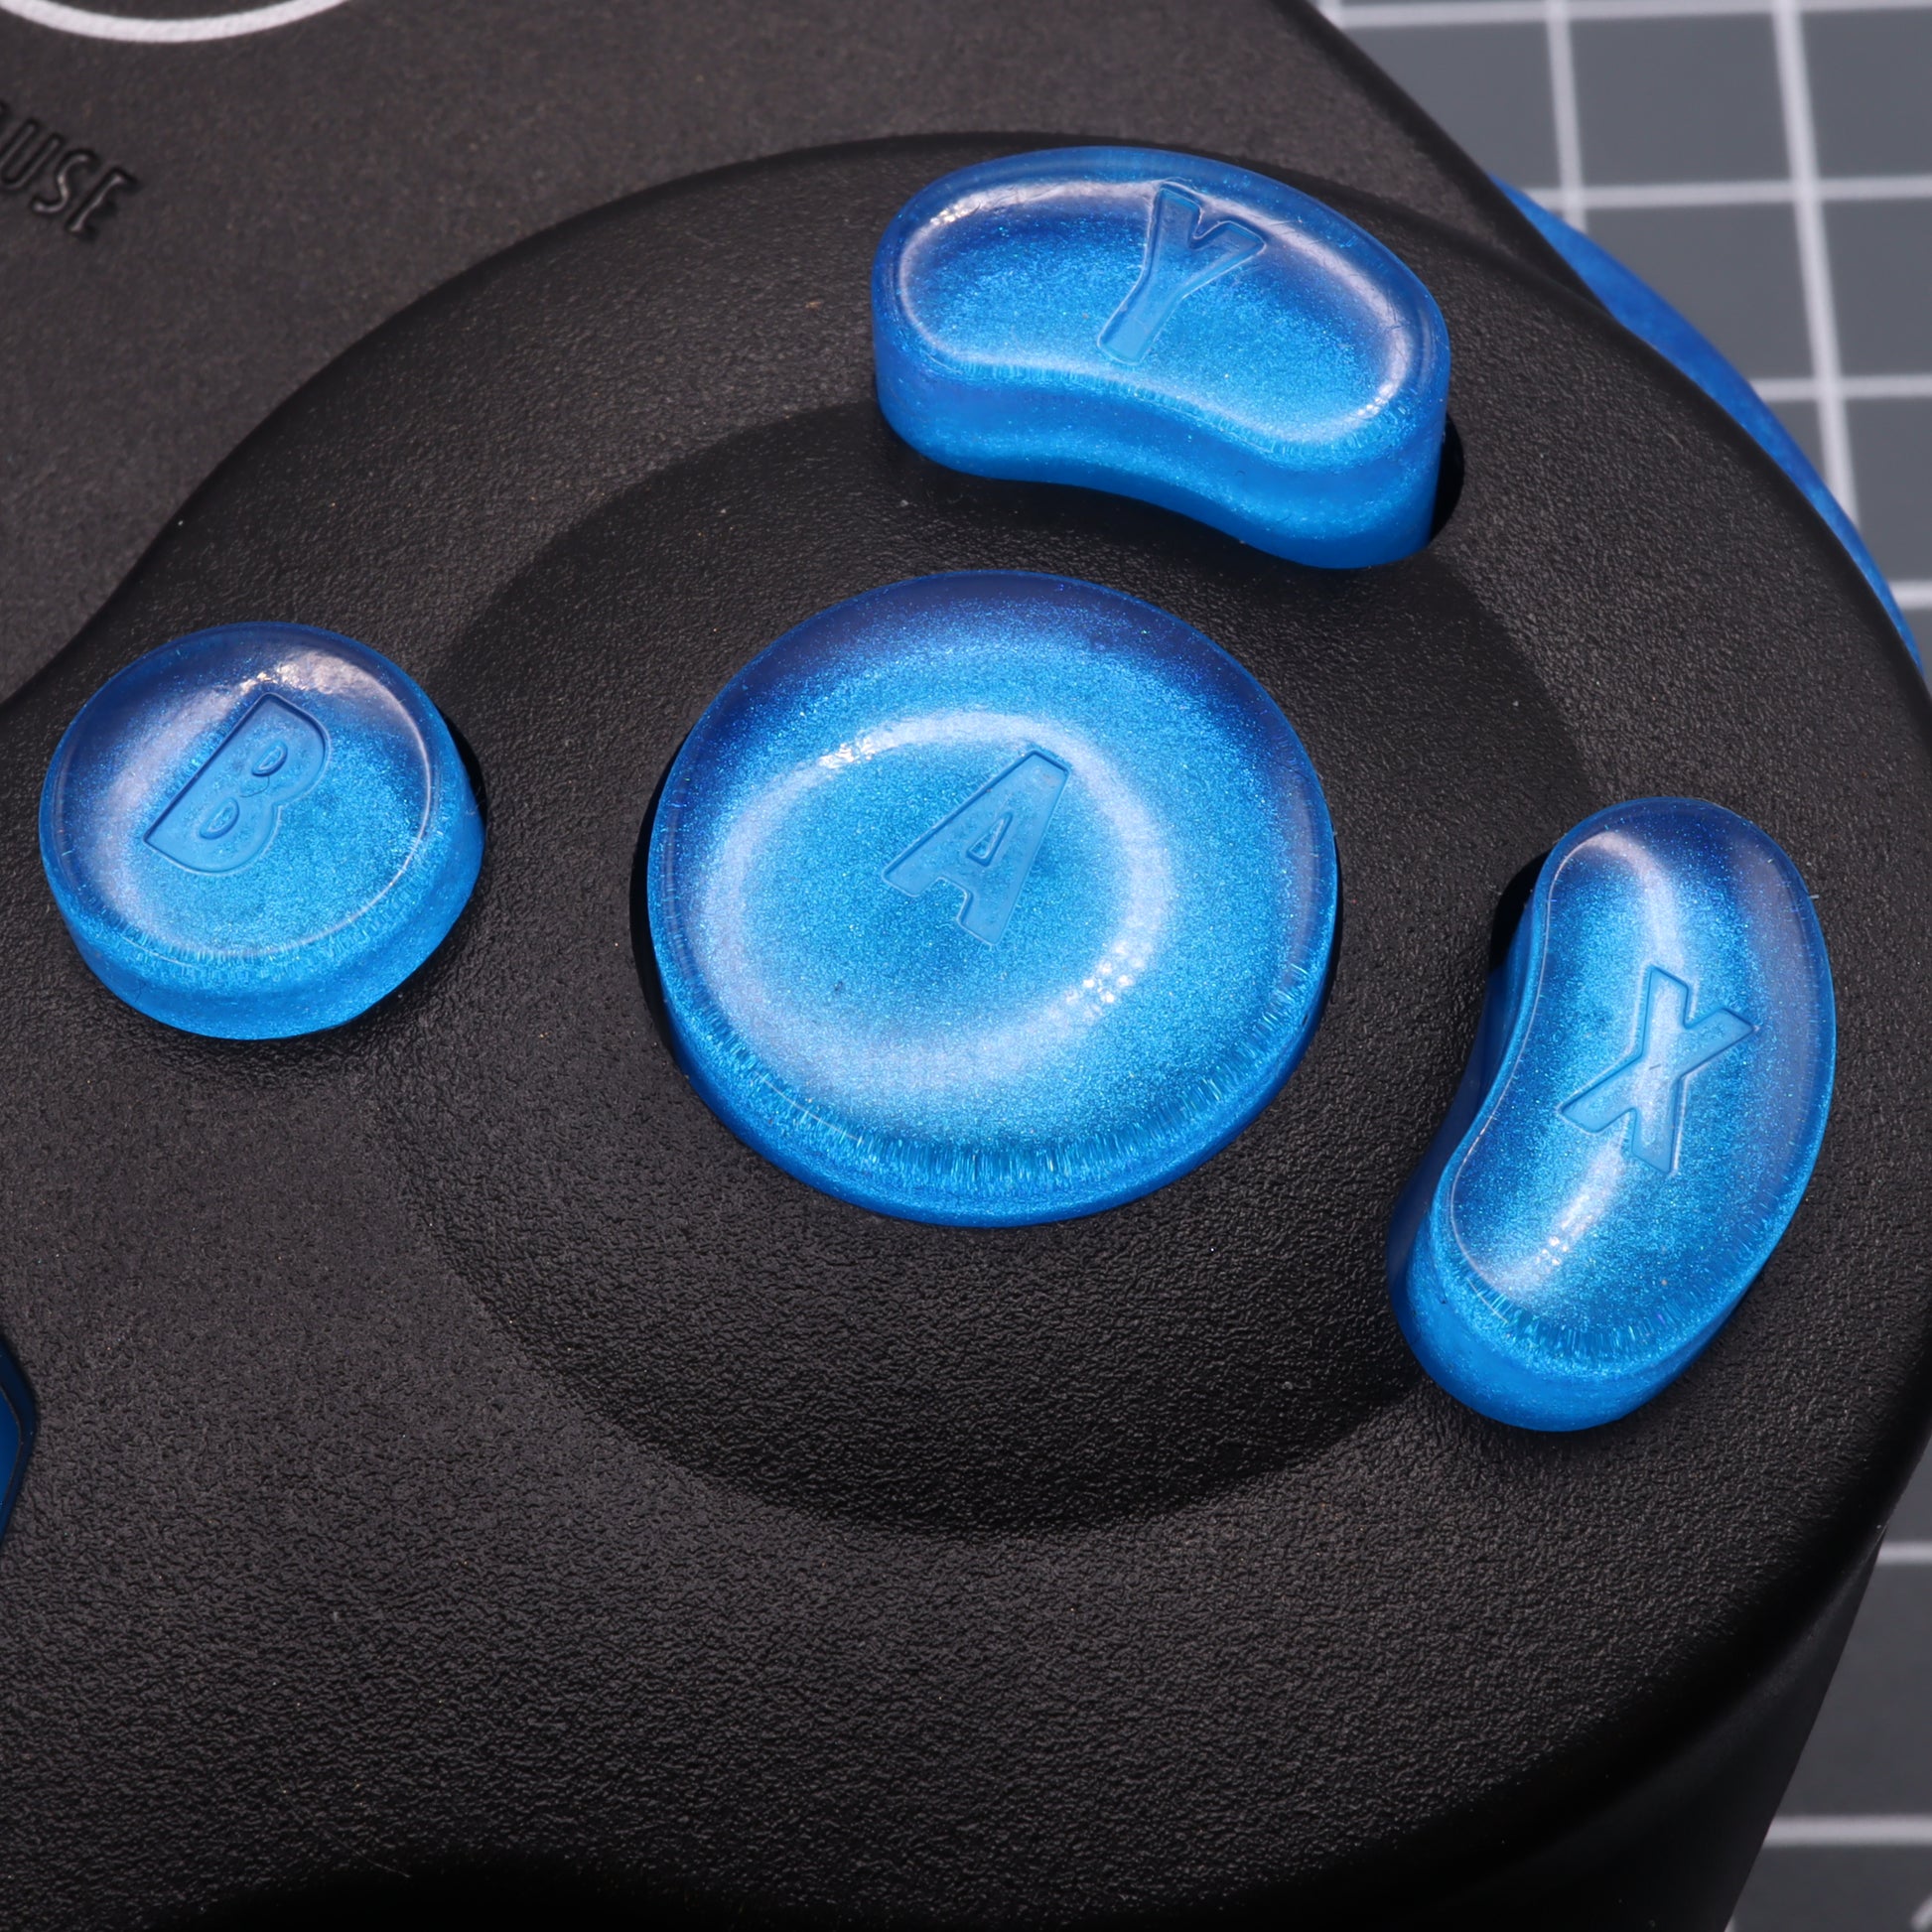 Close-up of the blue GameCube - Custom Button - Blueberry Candy custom-cast resin buttons on a black Nintendo Game Cube controller.